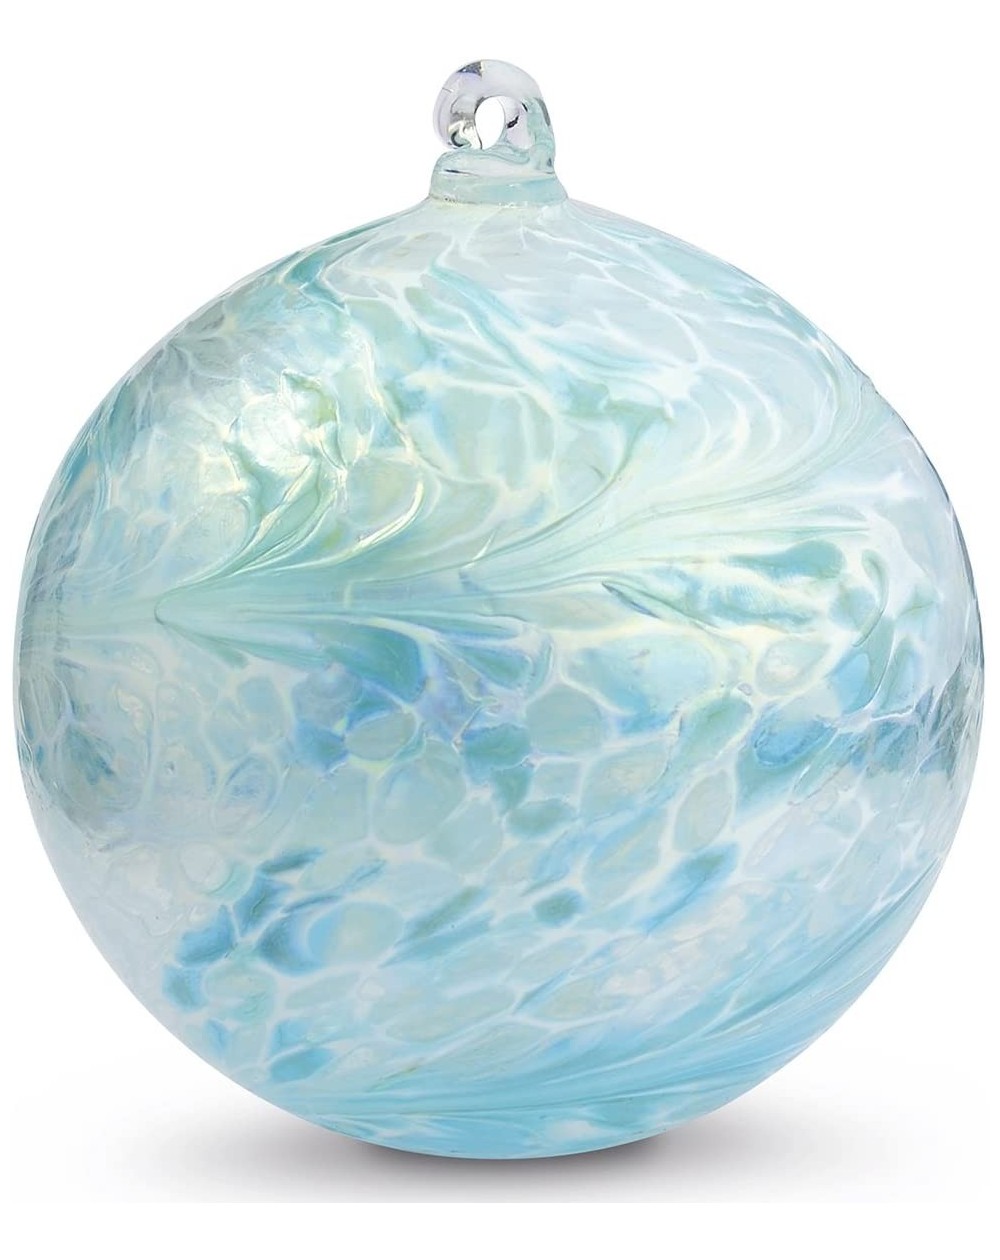 Ornaments Friendship Ball January 4 Inch Kugel Iridized Witch Ball by Iron Art Glass Designs - CX11F8I8XVT $37.53